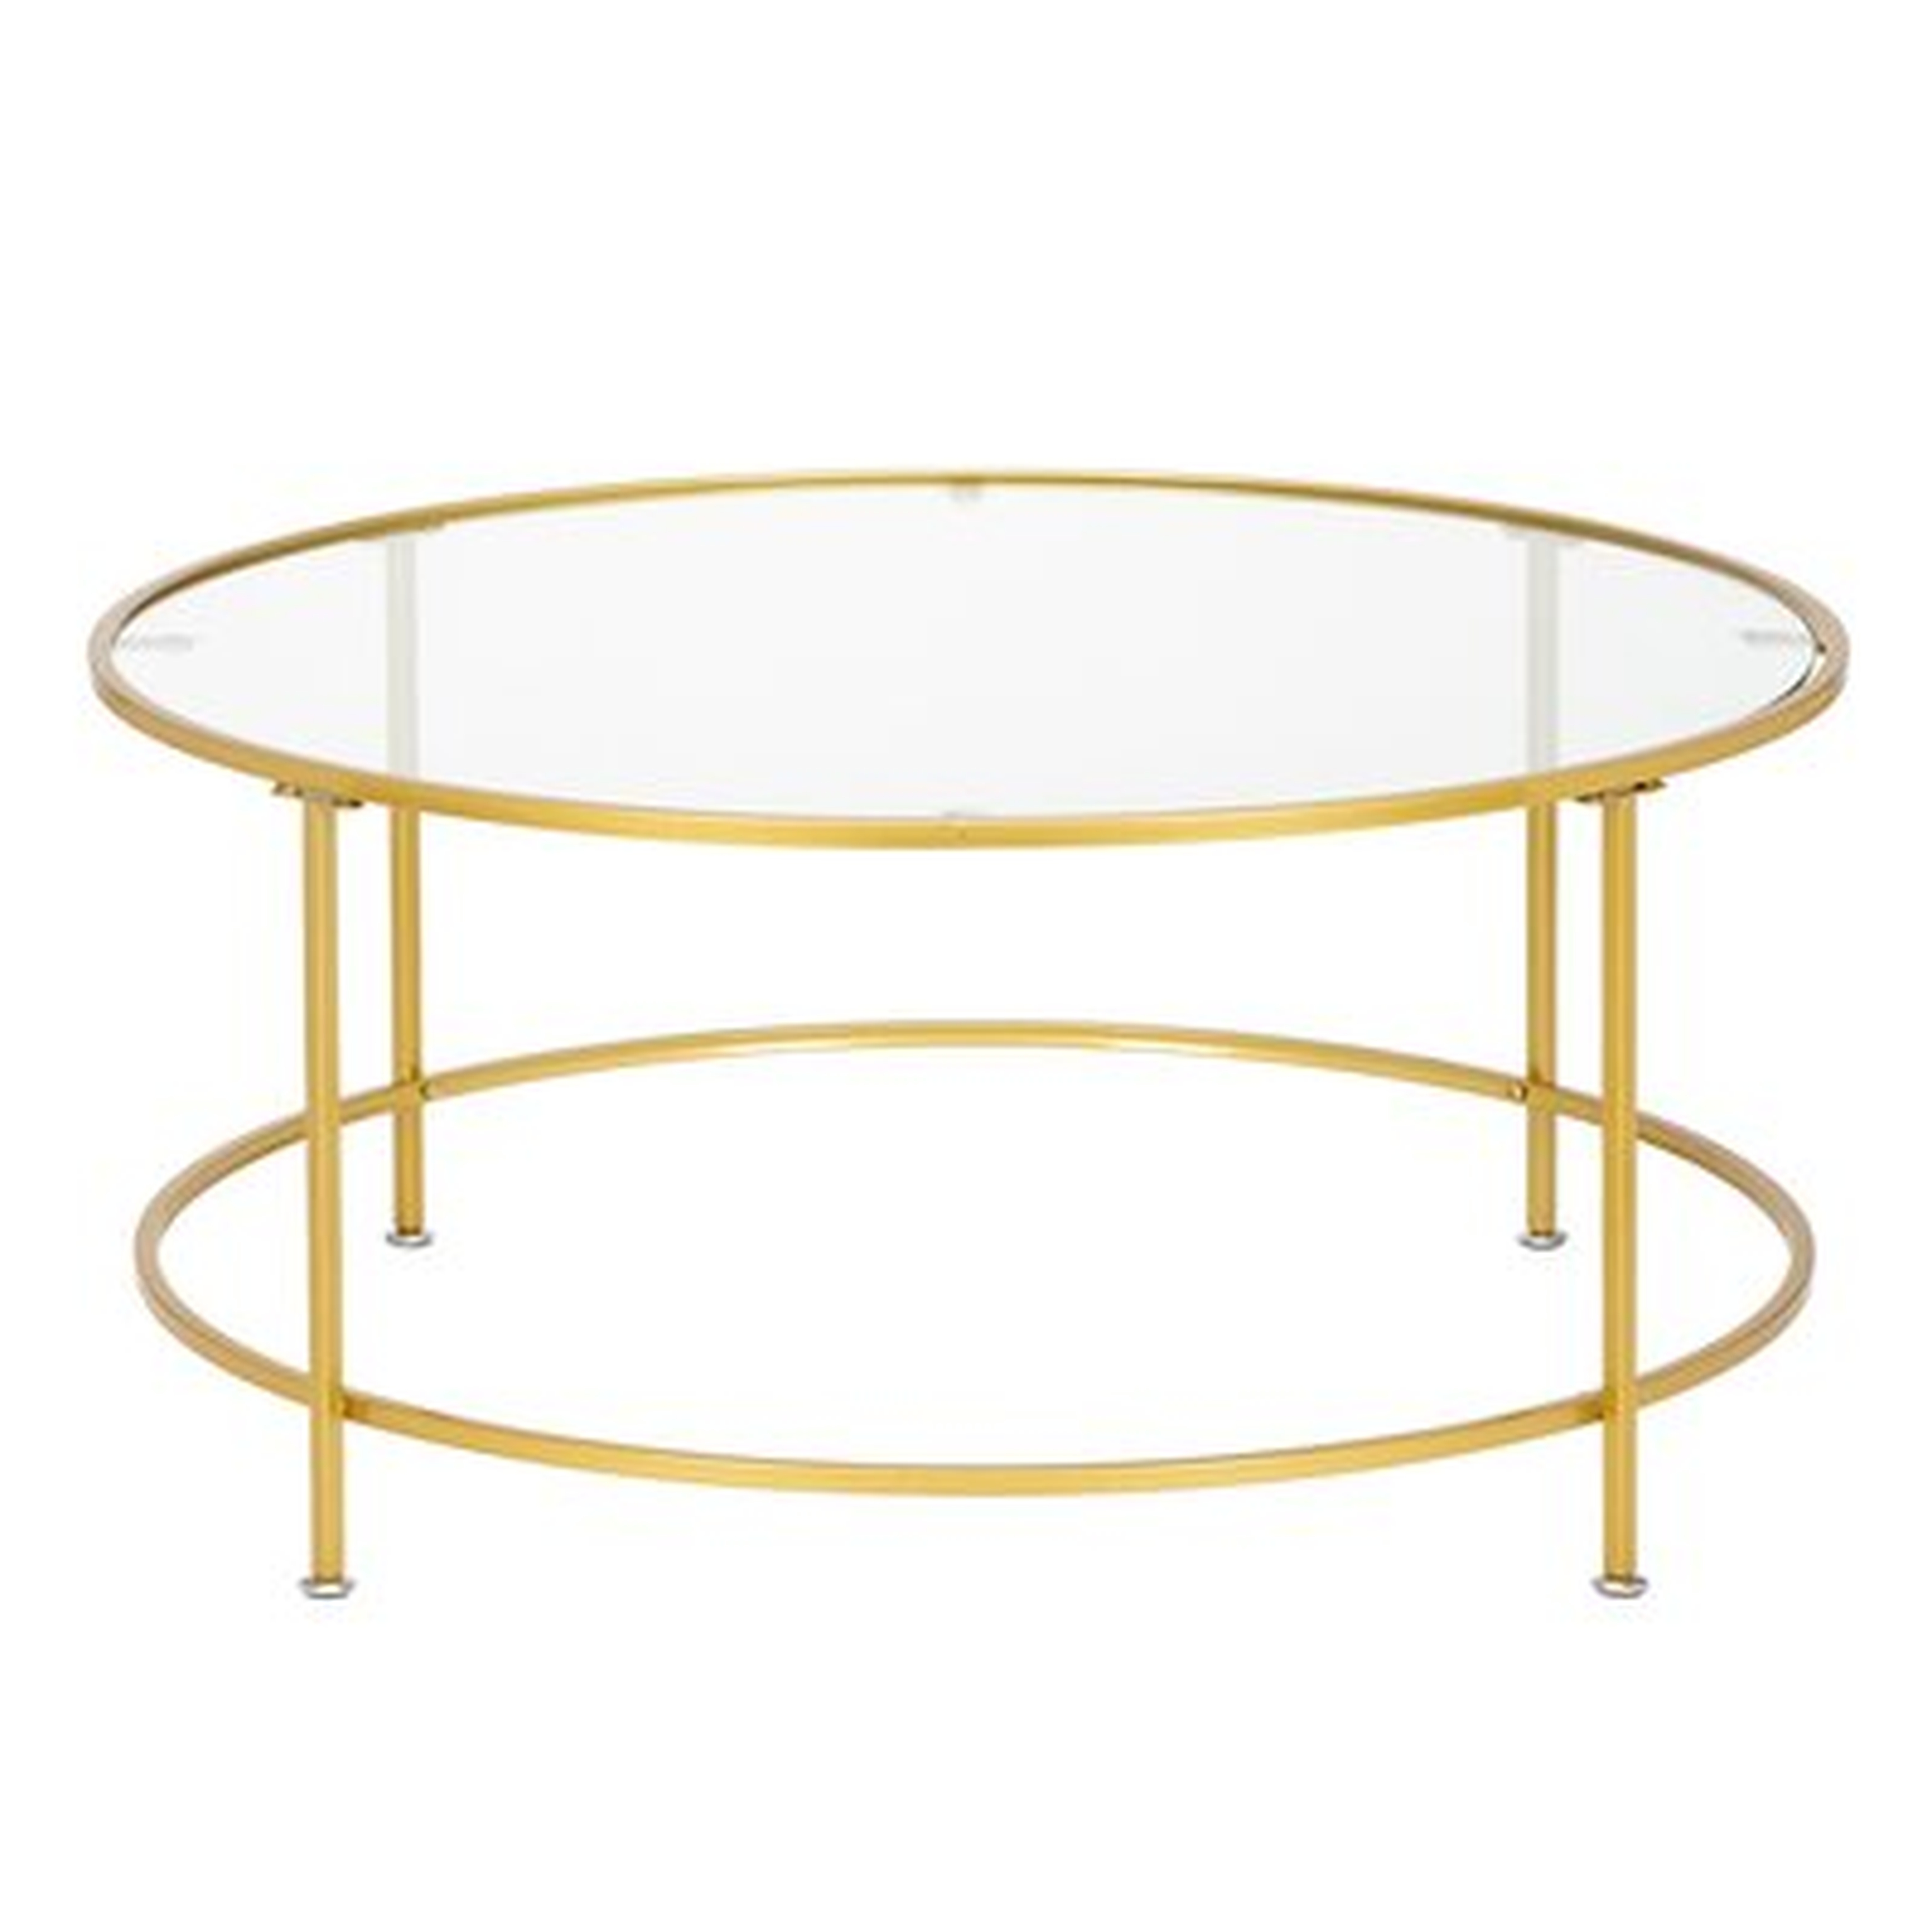 2 Layer Round Ironwork Coffee Table With Tempered Glass Countertop - Wayfair